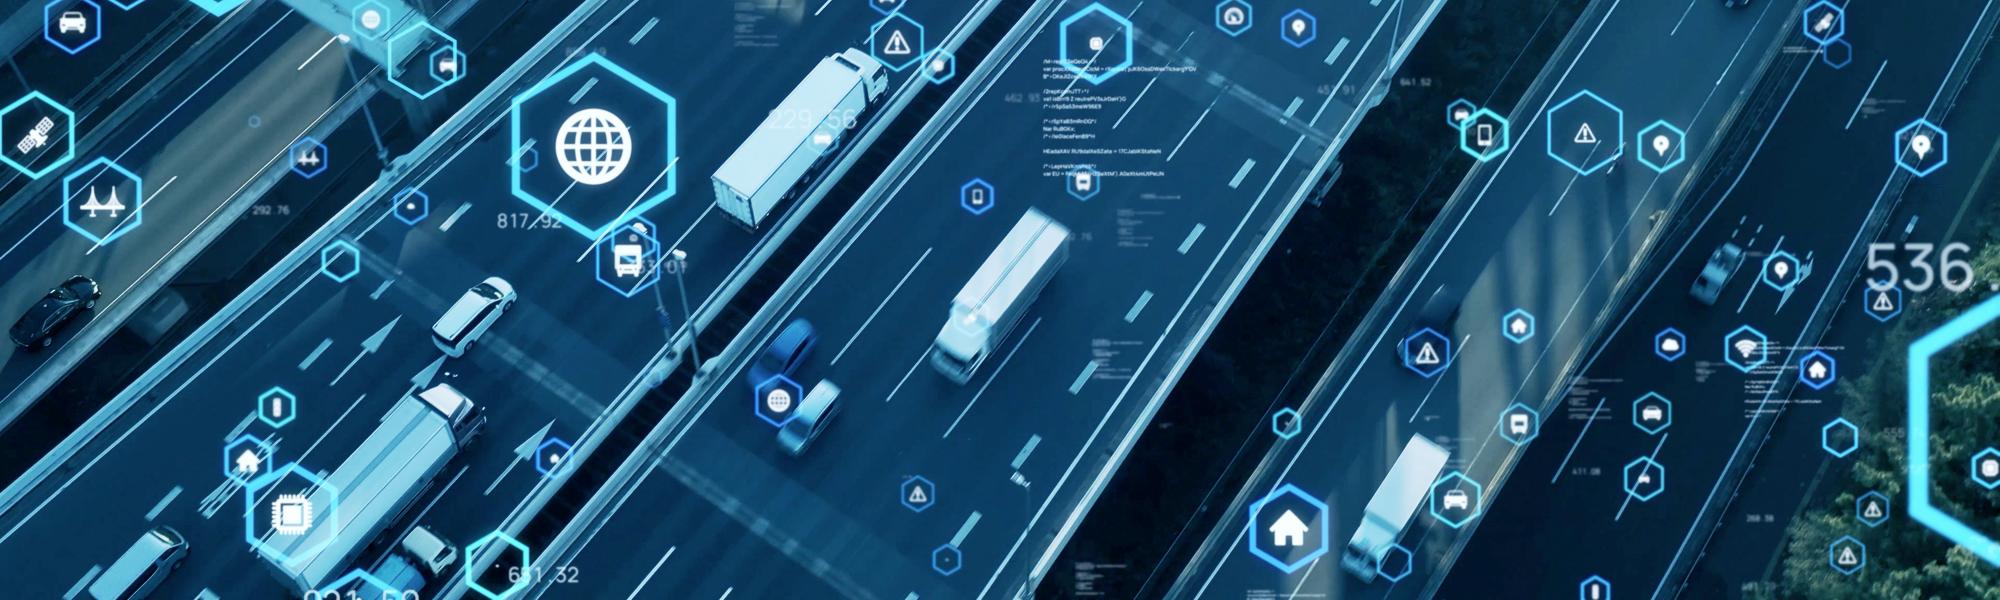 EU Transport Committee sets modern and pragmatic rules for Intelligent Transport Systems 